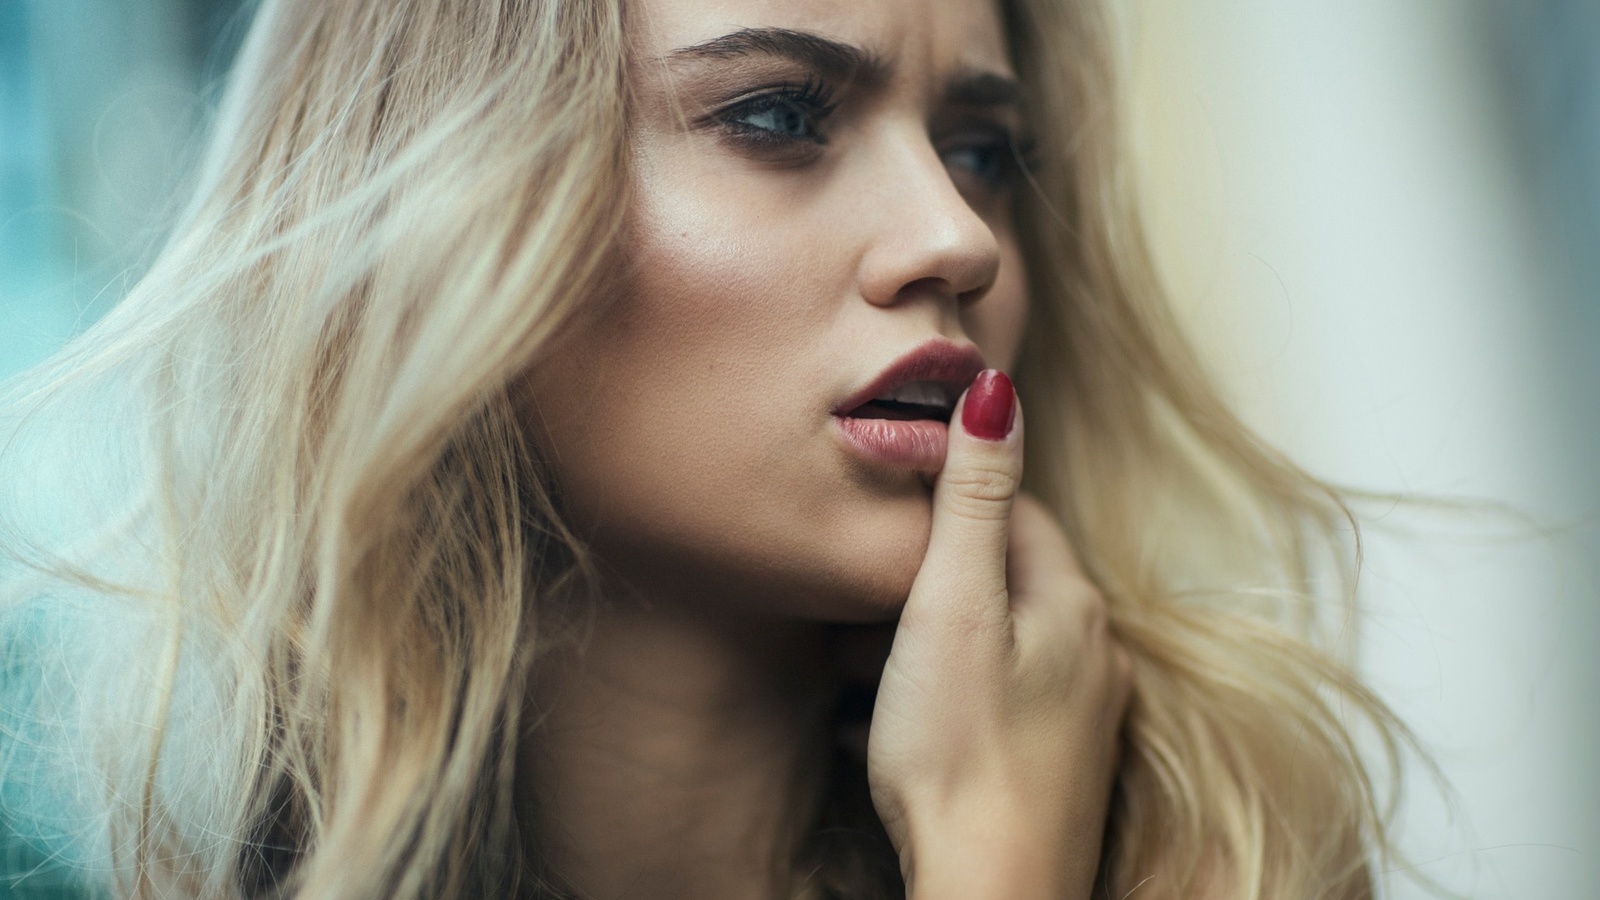 women, blonde, face, red nails, open mouth, looking away, depth of field, portrait